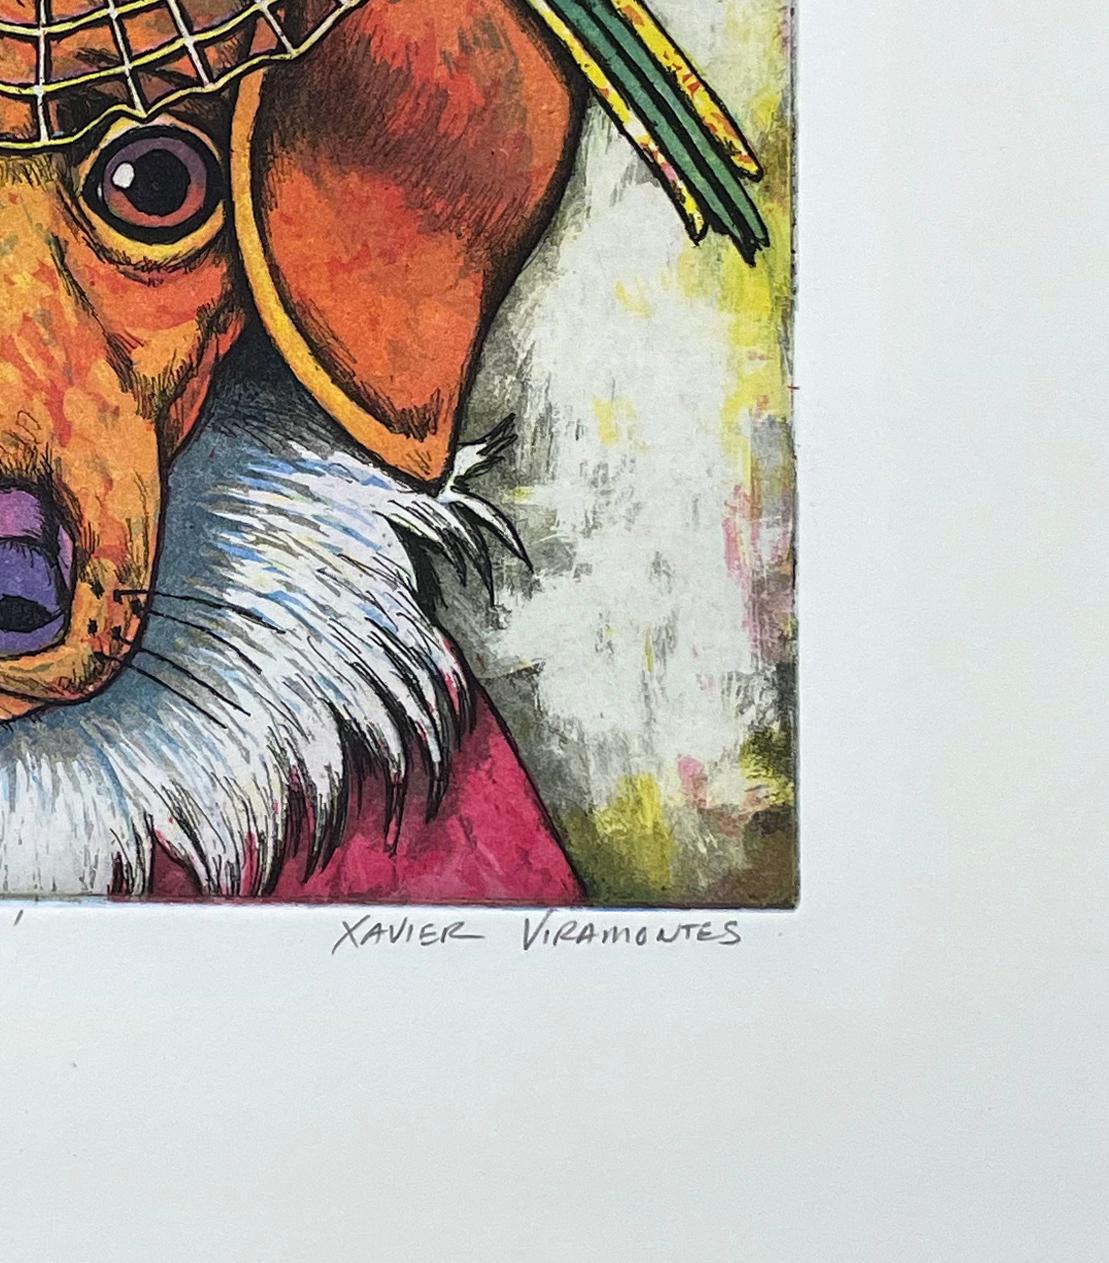 Signed, titled and numbered from the edition of 25. One from a series of six pet portraits.

Viramontes was the subject of a 1-hour documentary 